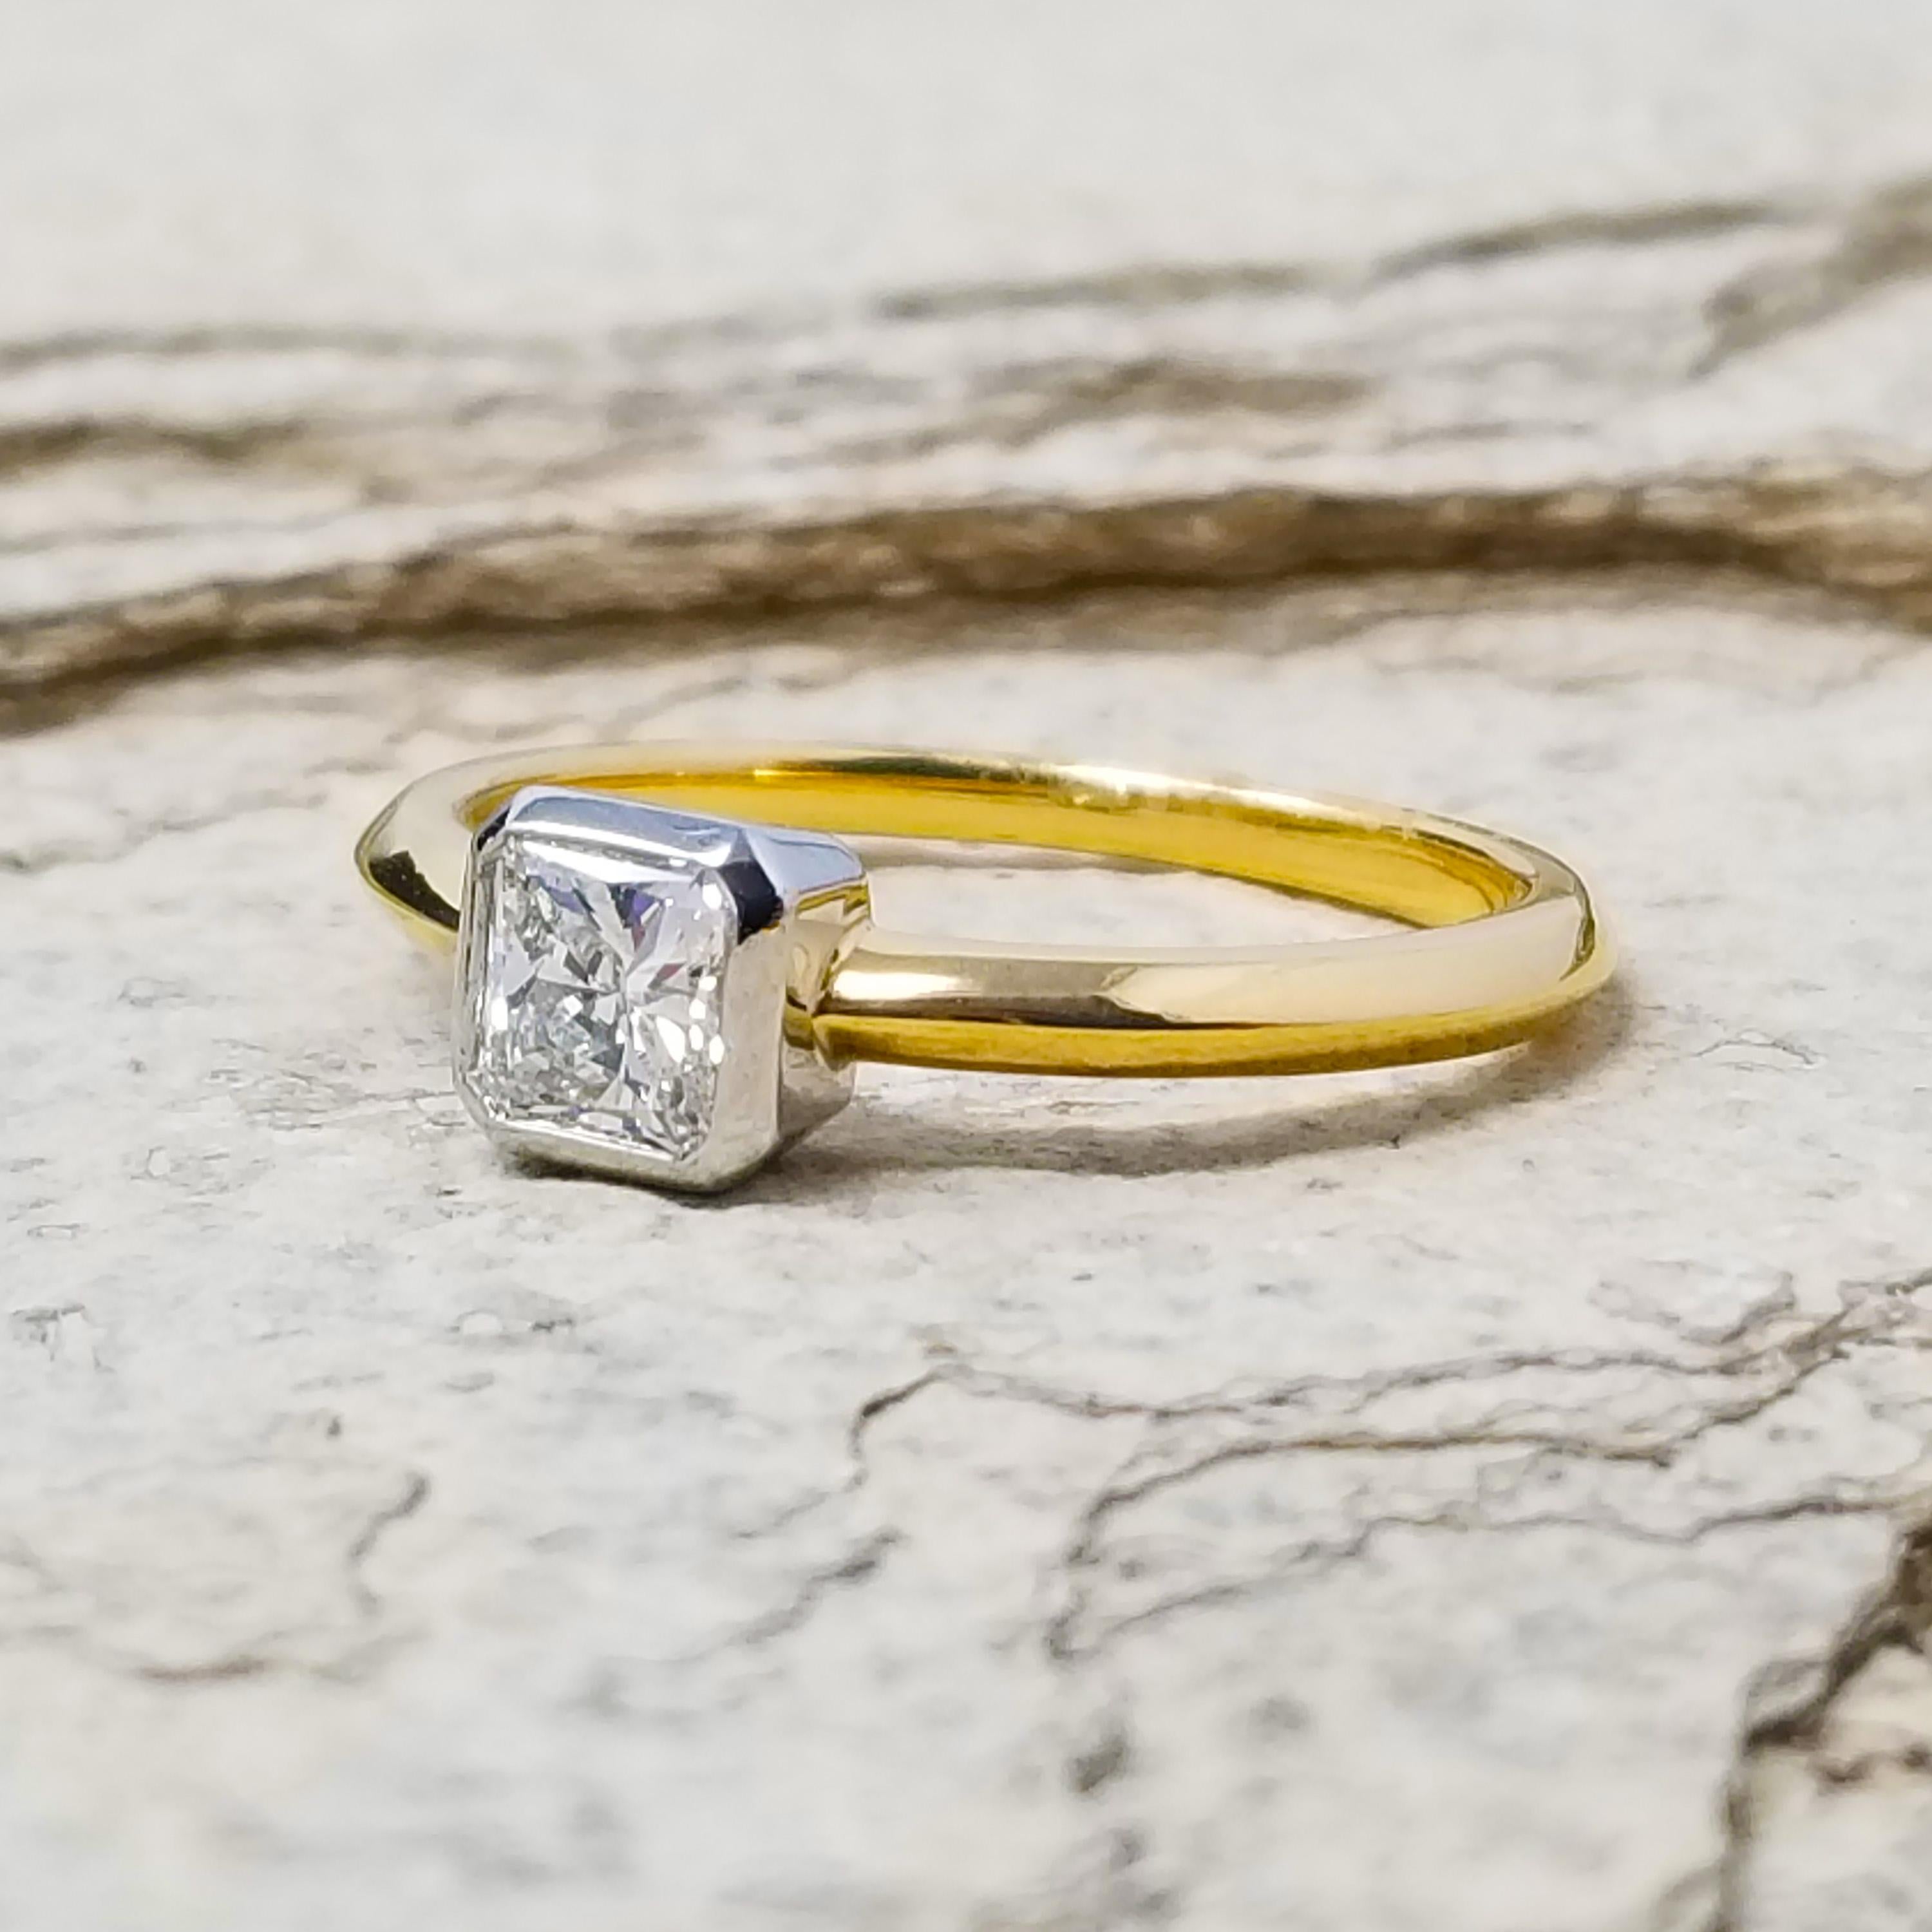 Elegant details, such as the knife edge band and the handmade platinum crown, set this 18kt diamond ring apart. The absolutely beautiful radiant cut diamond is cut for maximum sparkle, and this ring will absolutely dance on your finger. This can